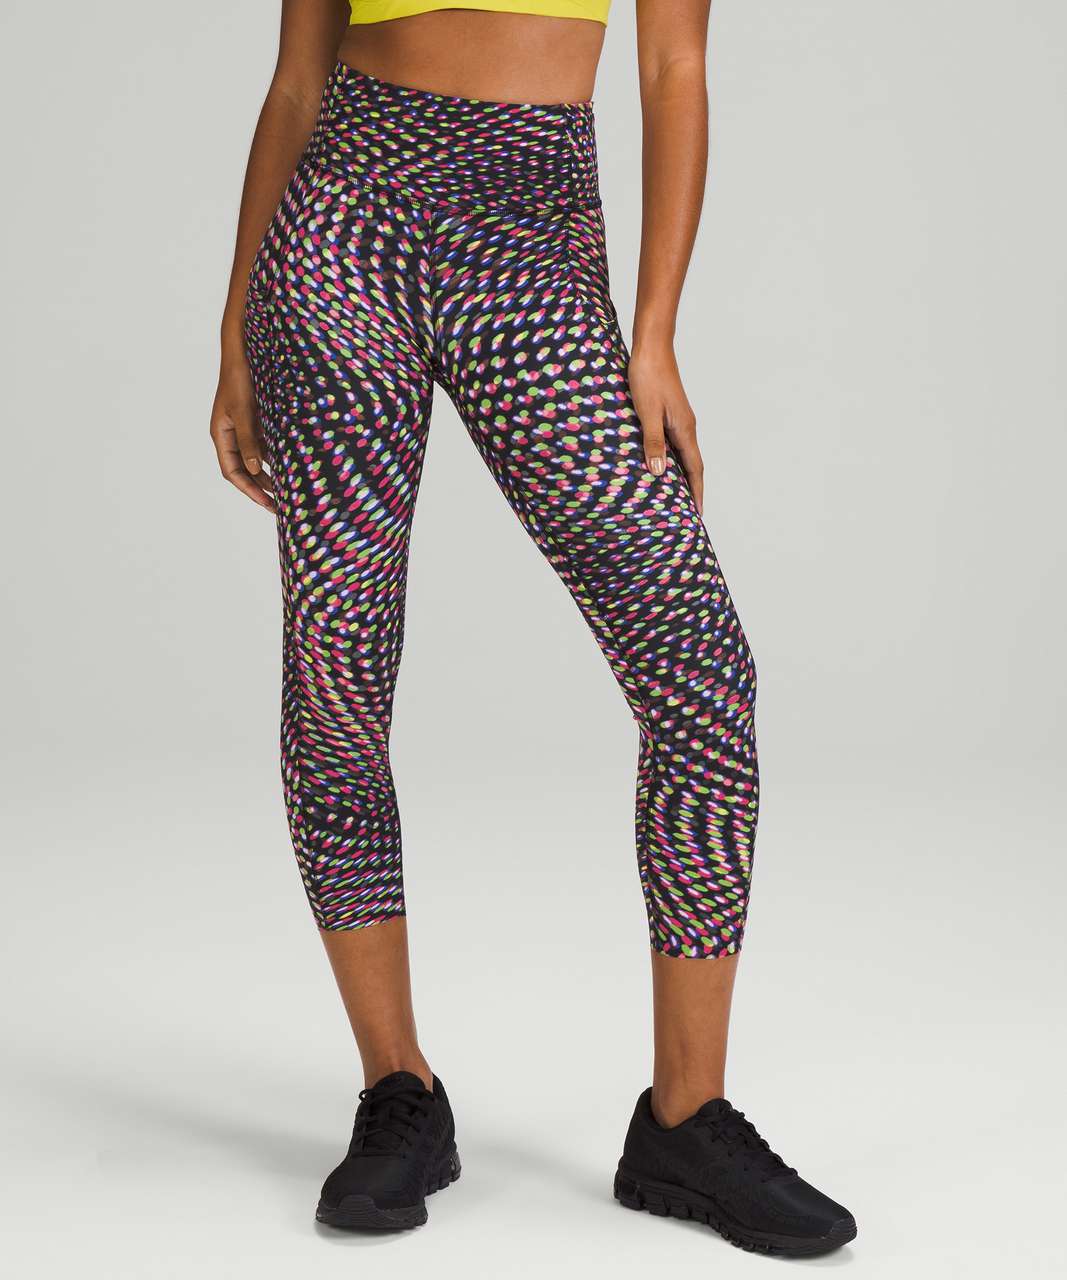 Lululemon SeaWheeze Fast and Free High-Rise Crop 23" - To The Beat Raspberry Multi